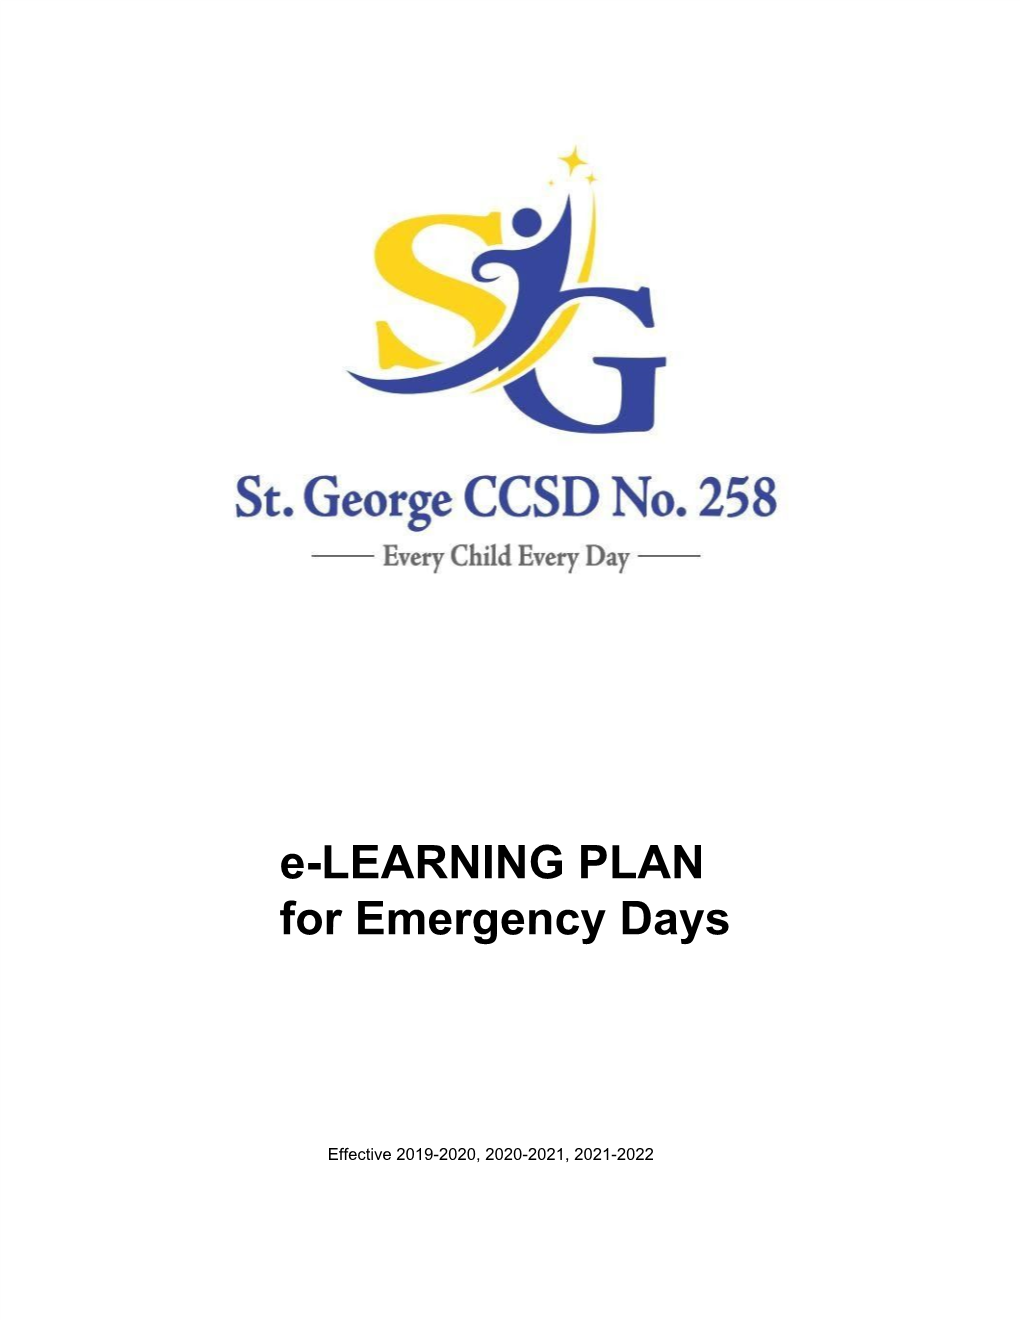 E-LEARNING PLAN for Emergency Days